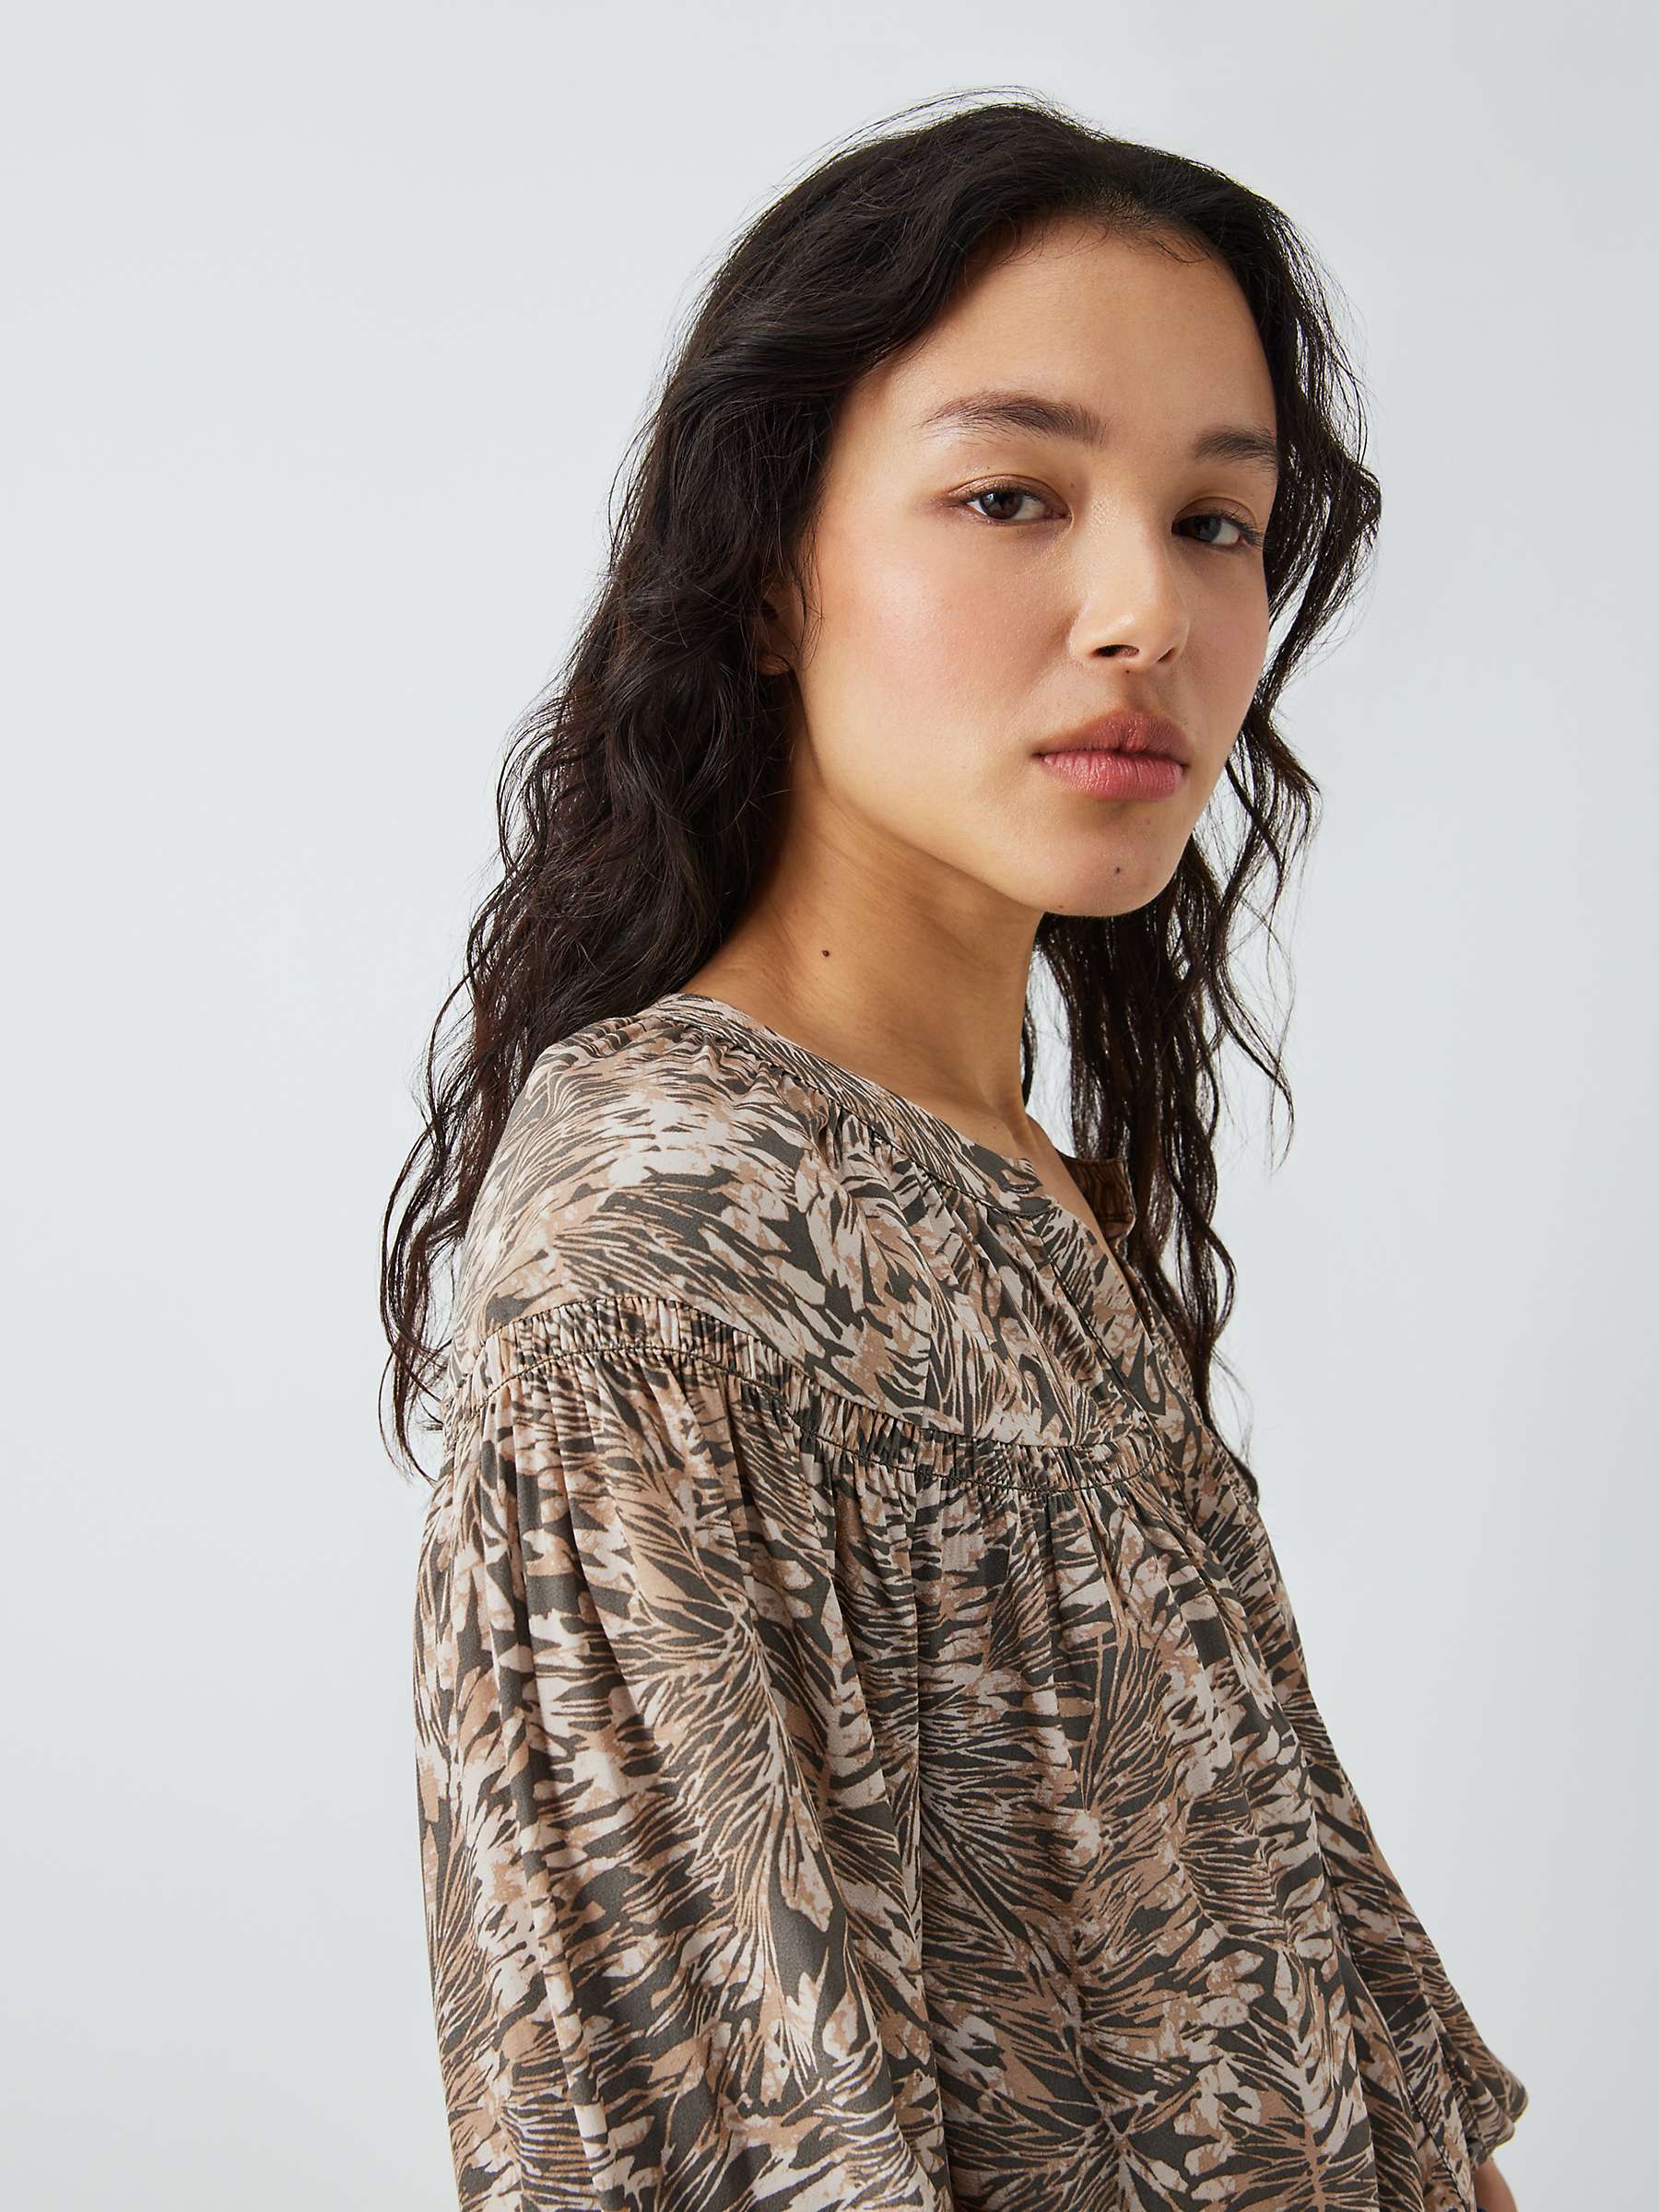 Buy AND/OR Juliette Abstract Print Shirt, Green Online at johnlewis.com